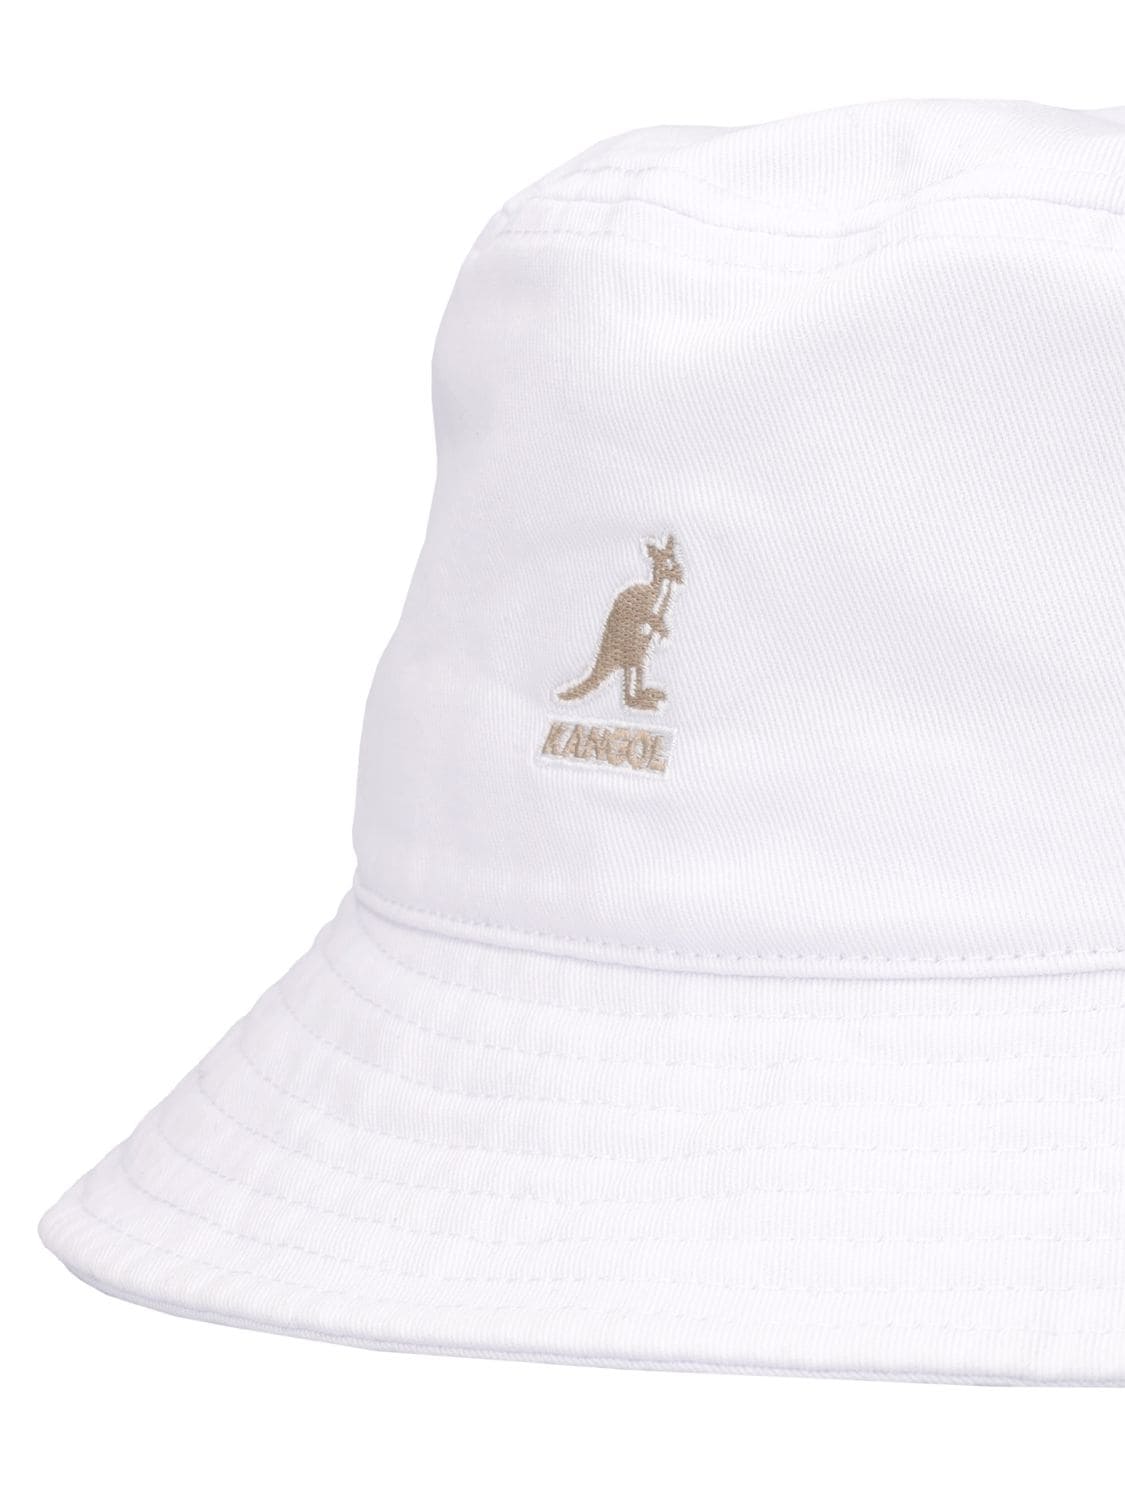 Shop Kangol Washed Cotton Bucket Hat In White